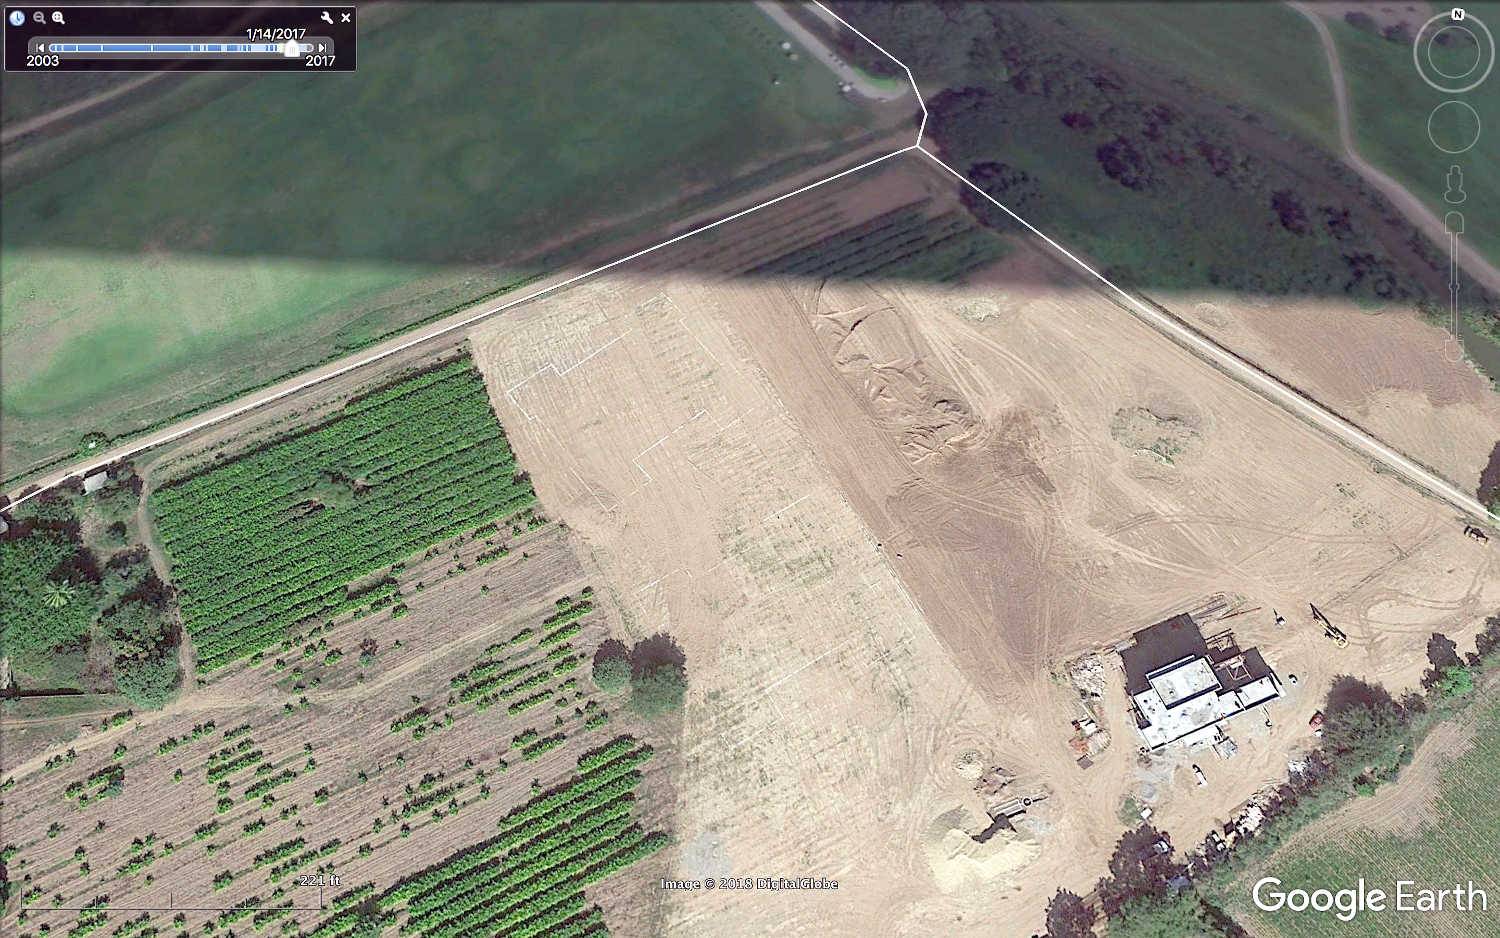 Google Earth image as of 1-14-17.  Note the white chalk lines indicating an outline of a possible building foundation.  Not sure if that is correct, but it certainly appears that way.